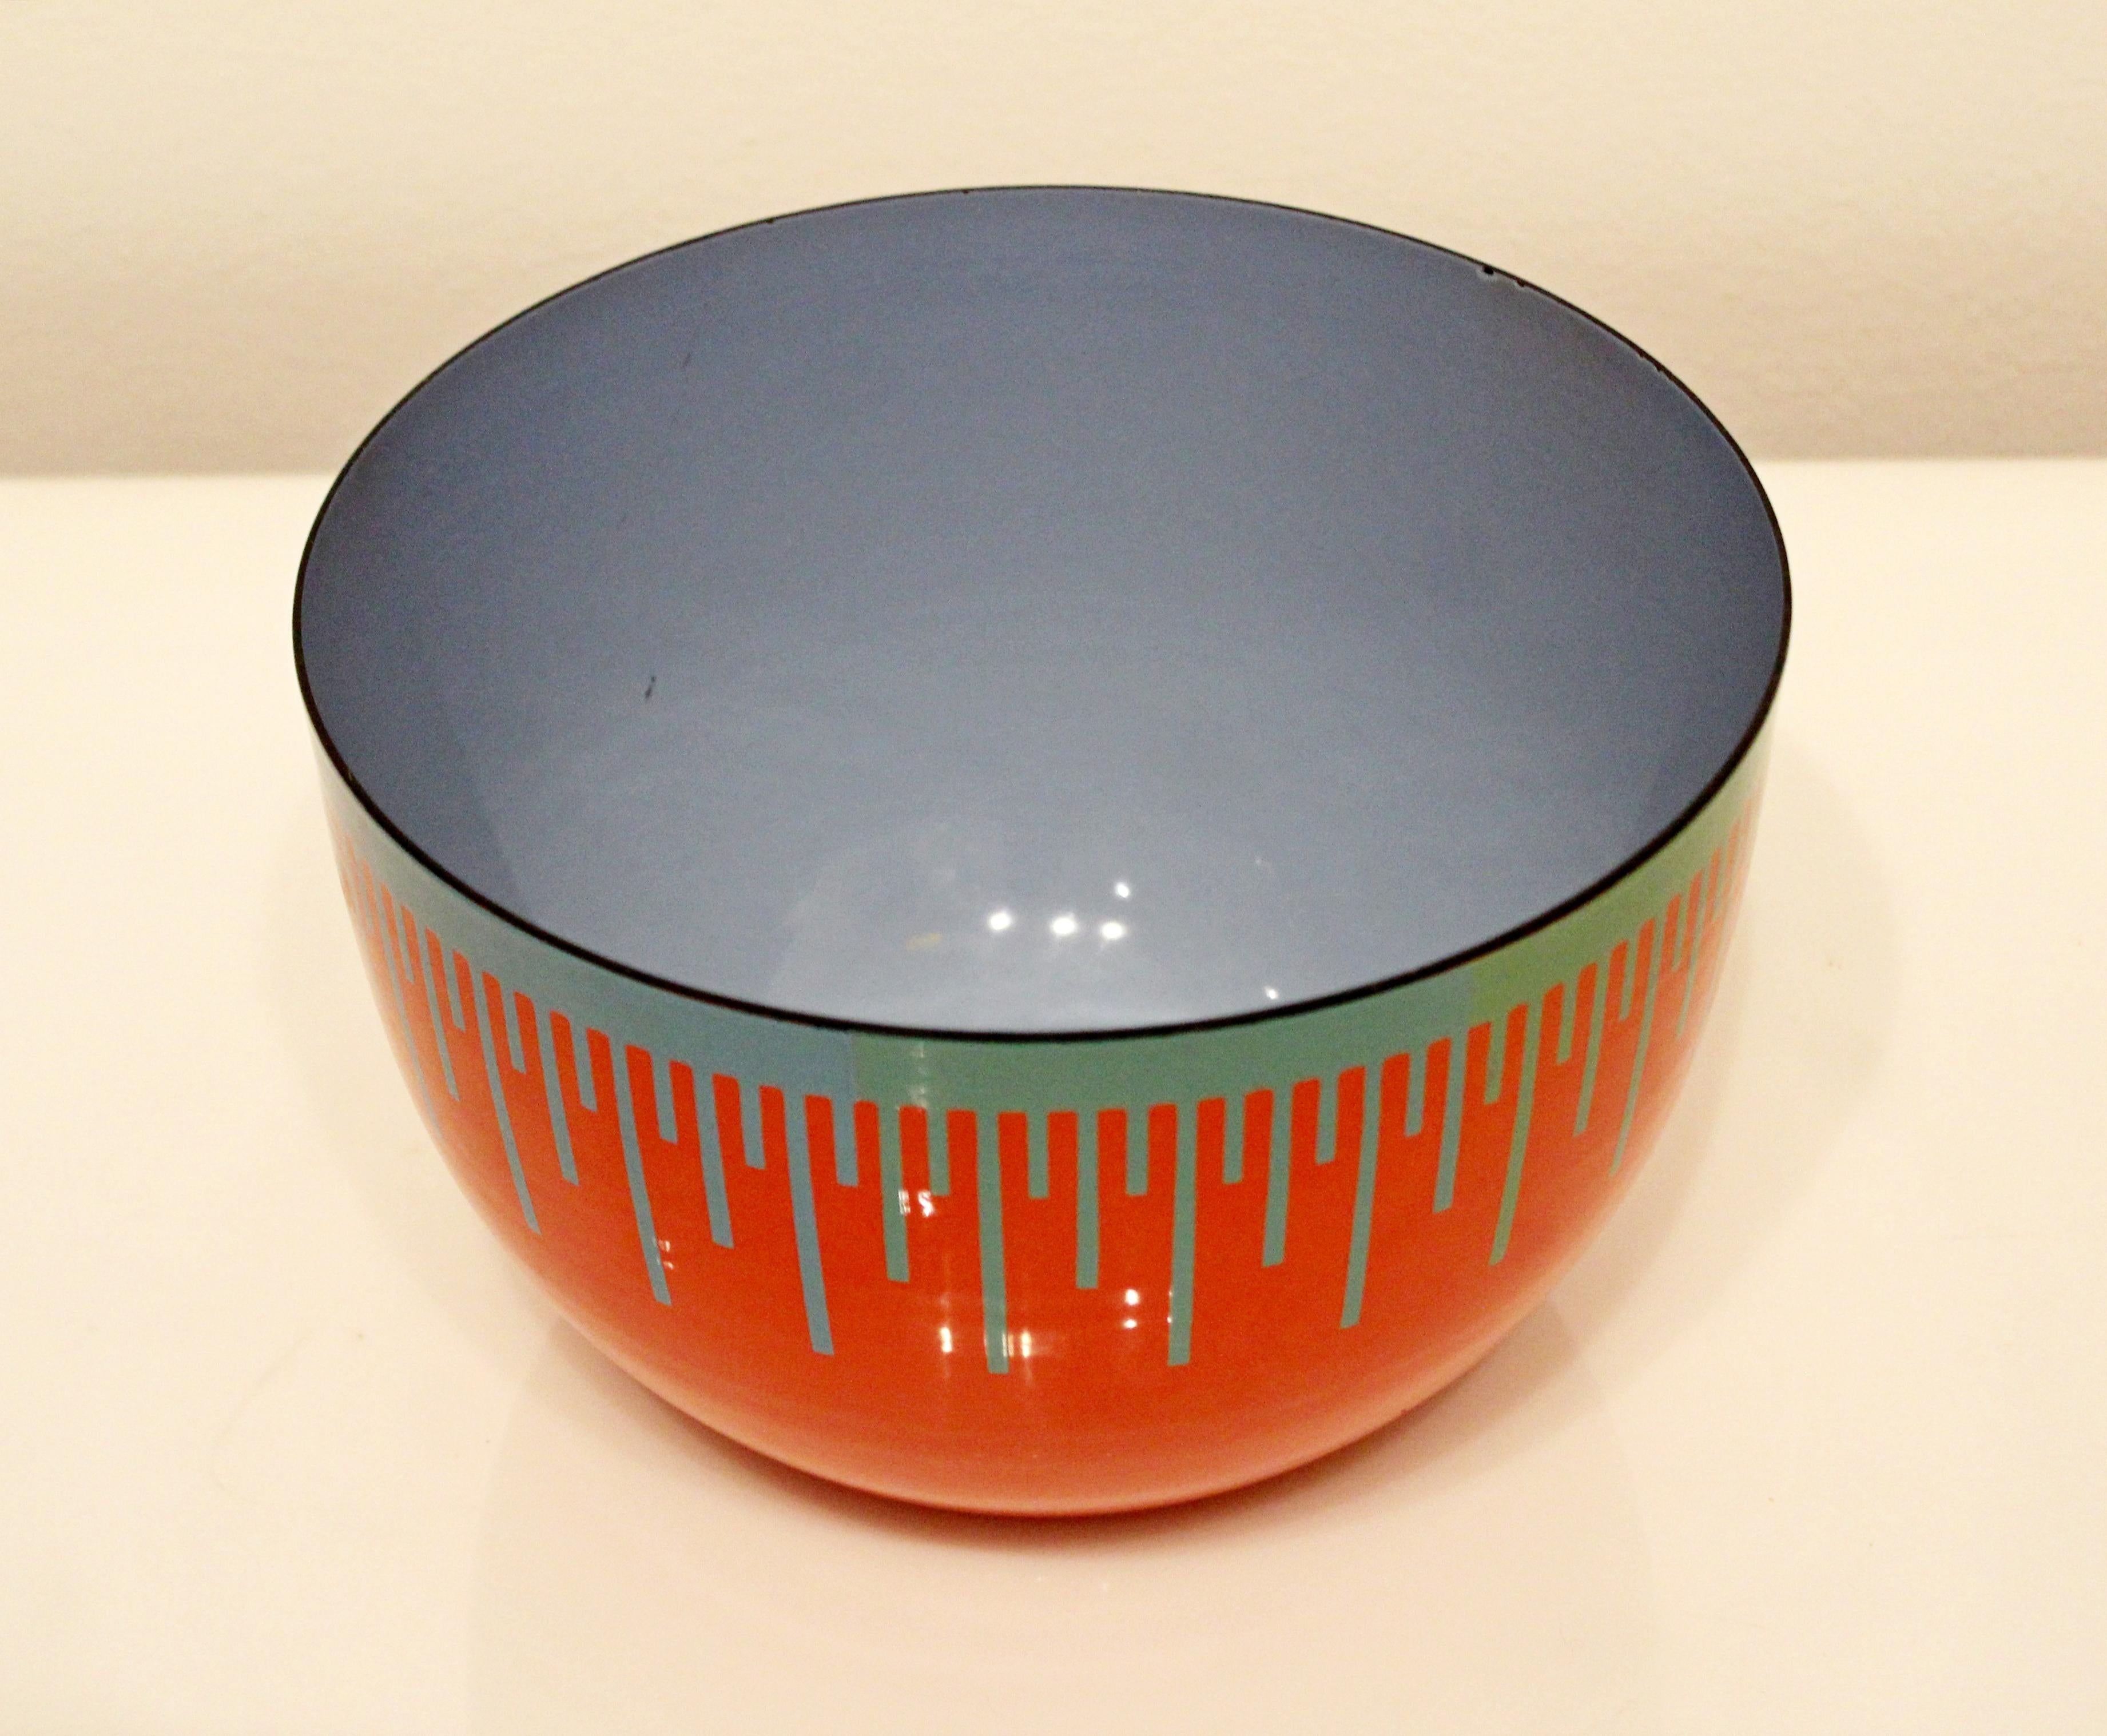 For your consideration is a red and blue art glass bowl, stamped Anuszkiewicz. In excellent condition. The dimensions are 8.5